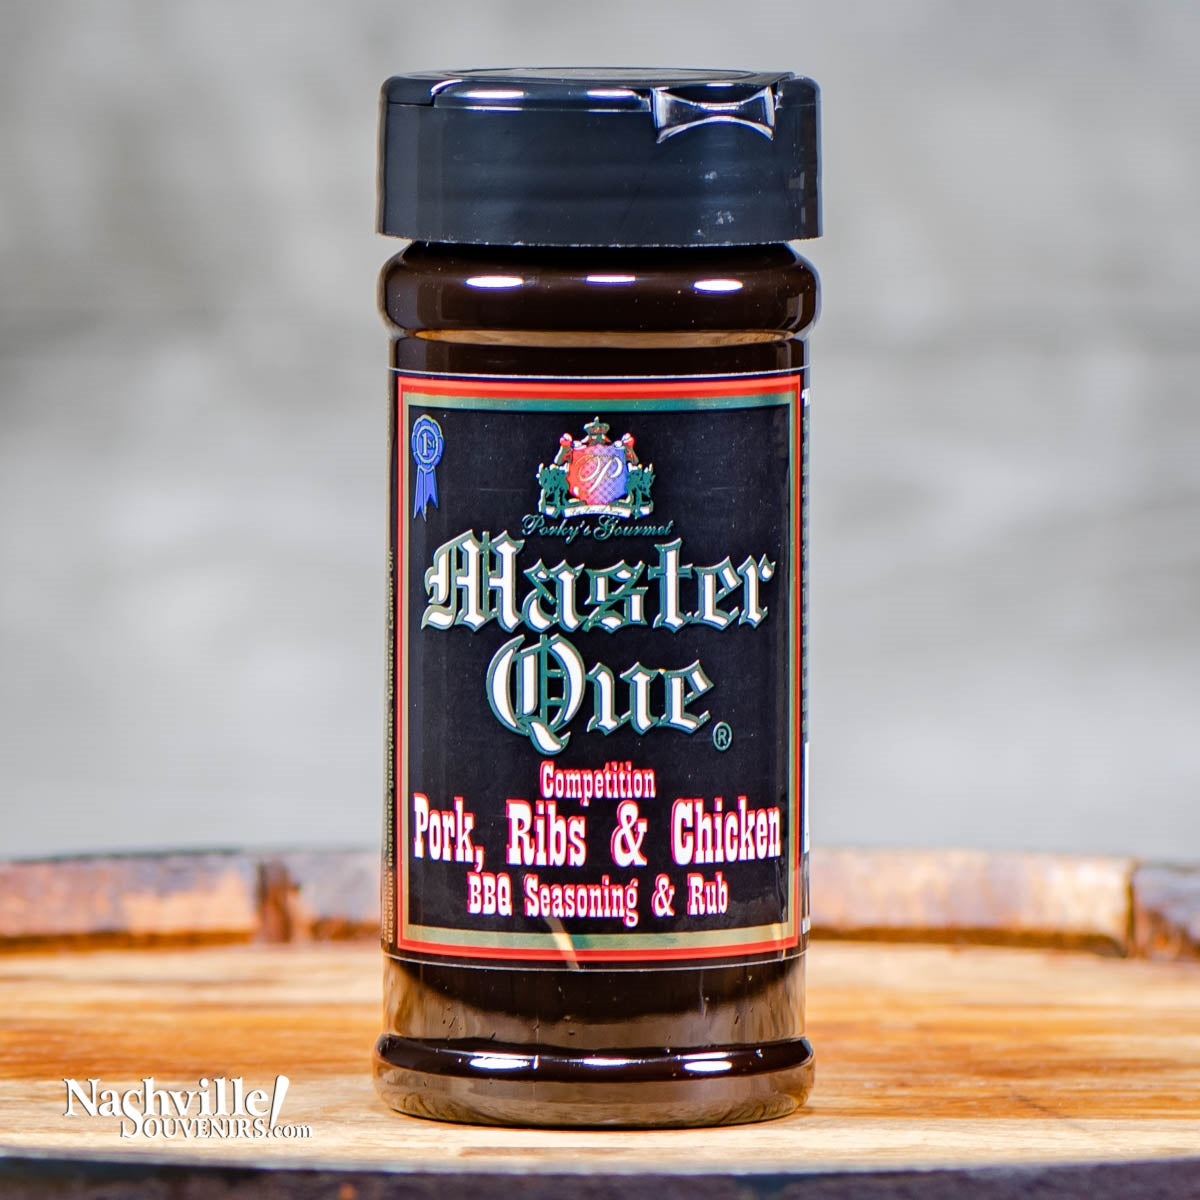 Buy Master Que BBQ Seasoning and Rub containing real Jack Daniels Tennessee whiskey. FREE SHIPPING on all US orders over $75!